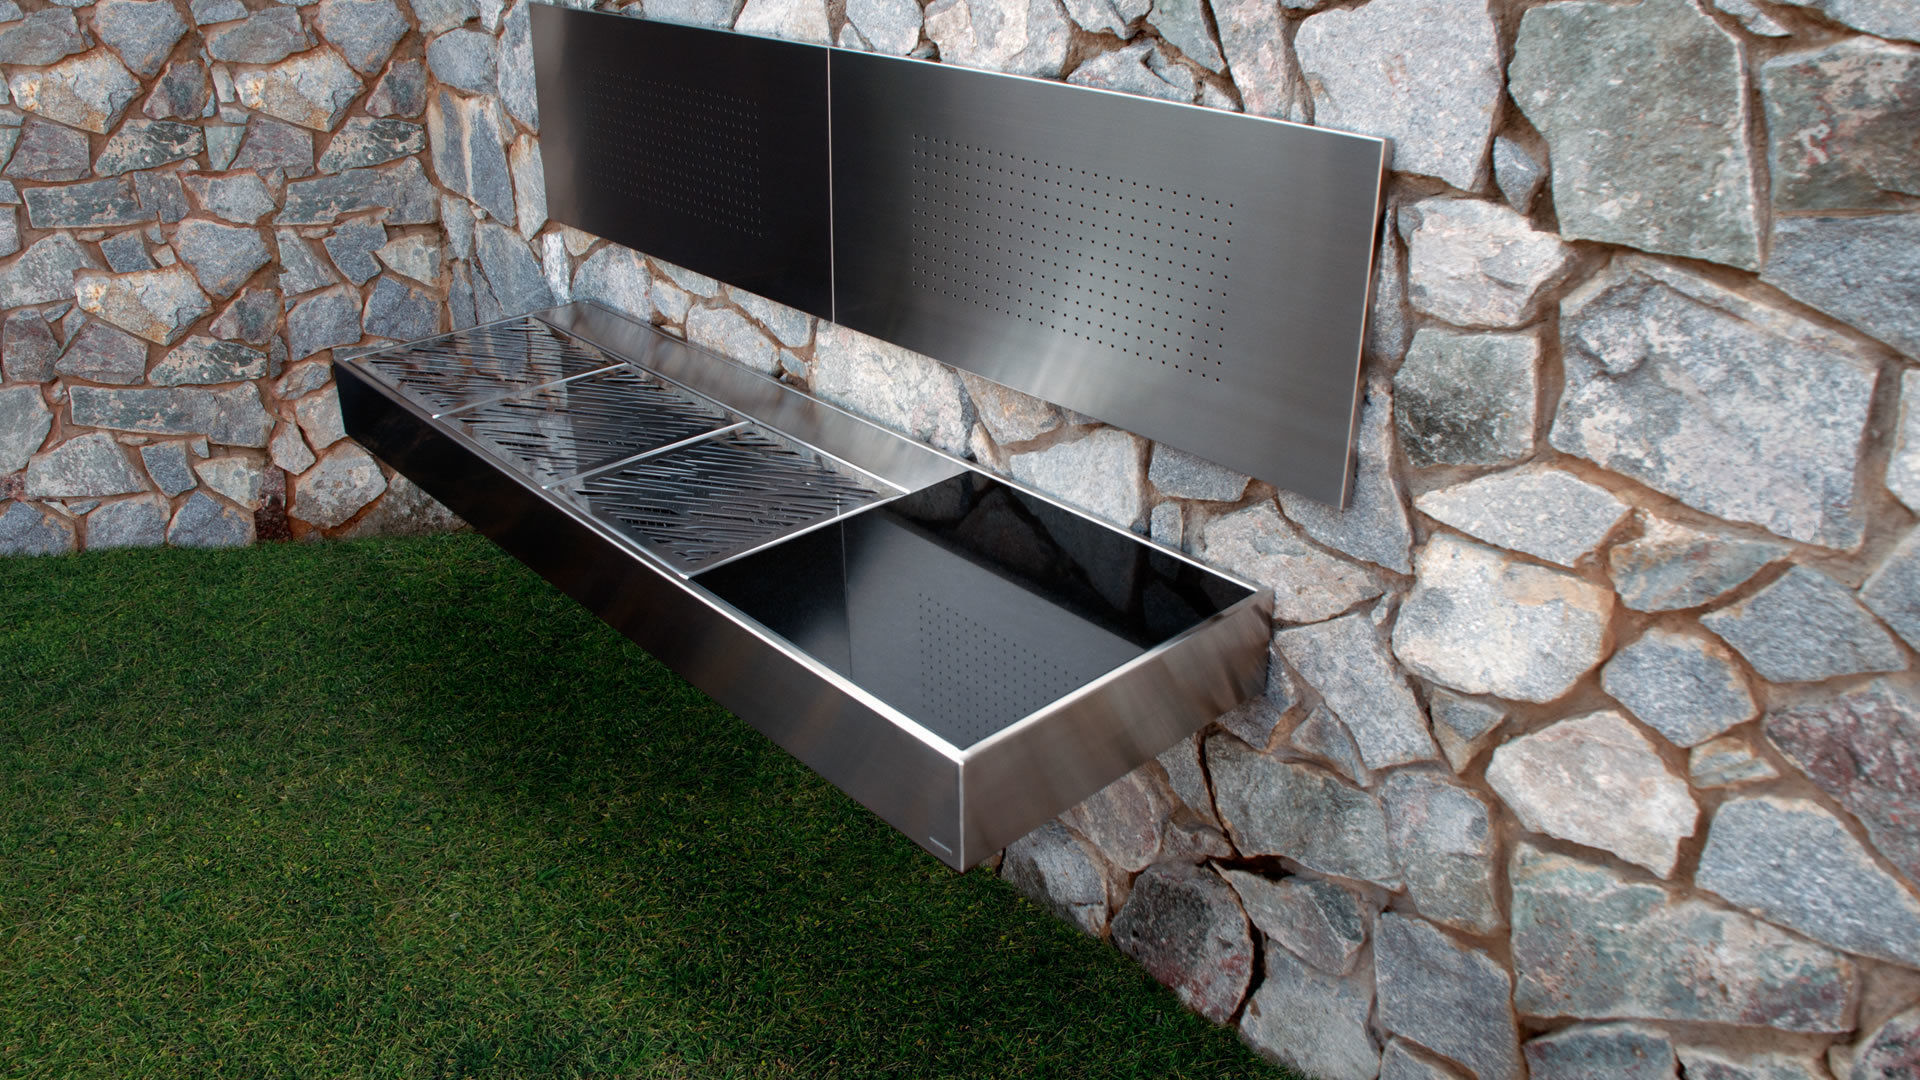 Barbecues tout inox Design, chemoa.fr chemoa.fr Modern style gardens Fire pits & barbecues